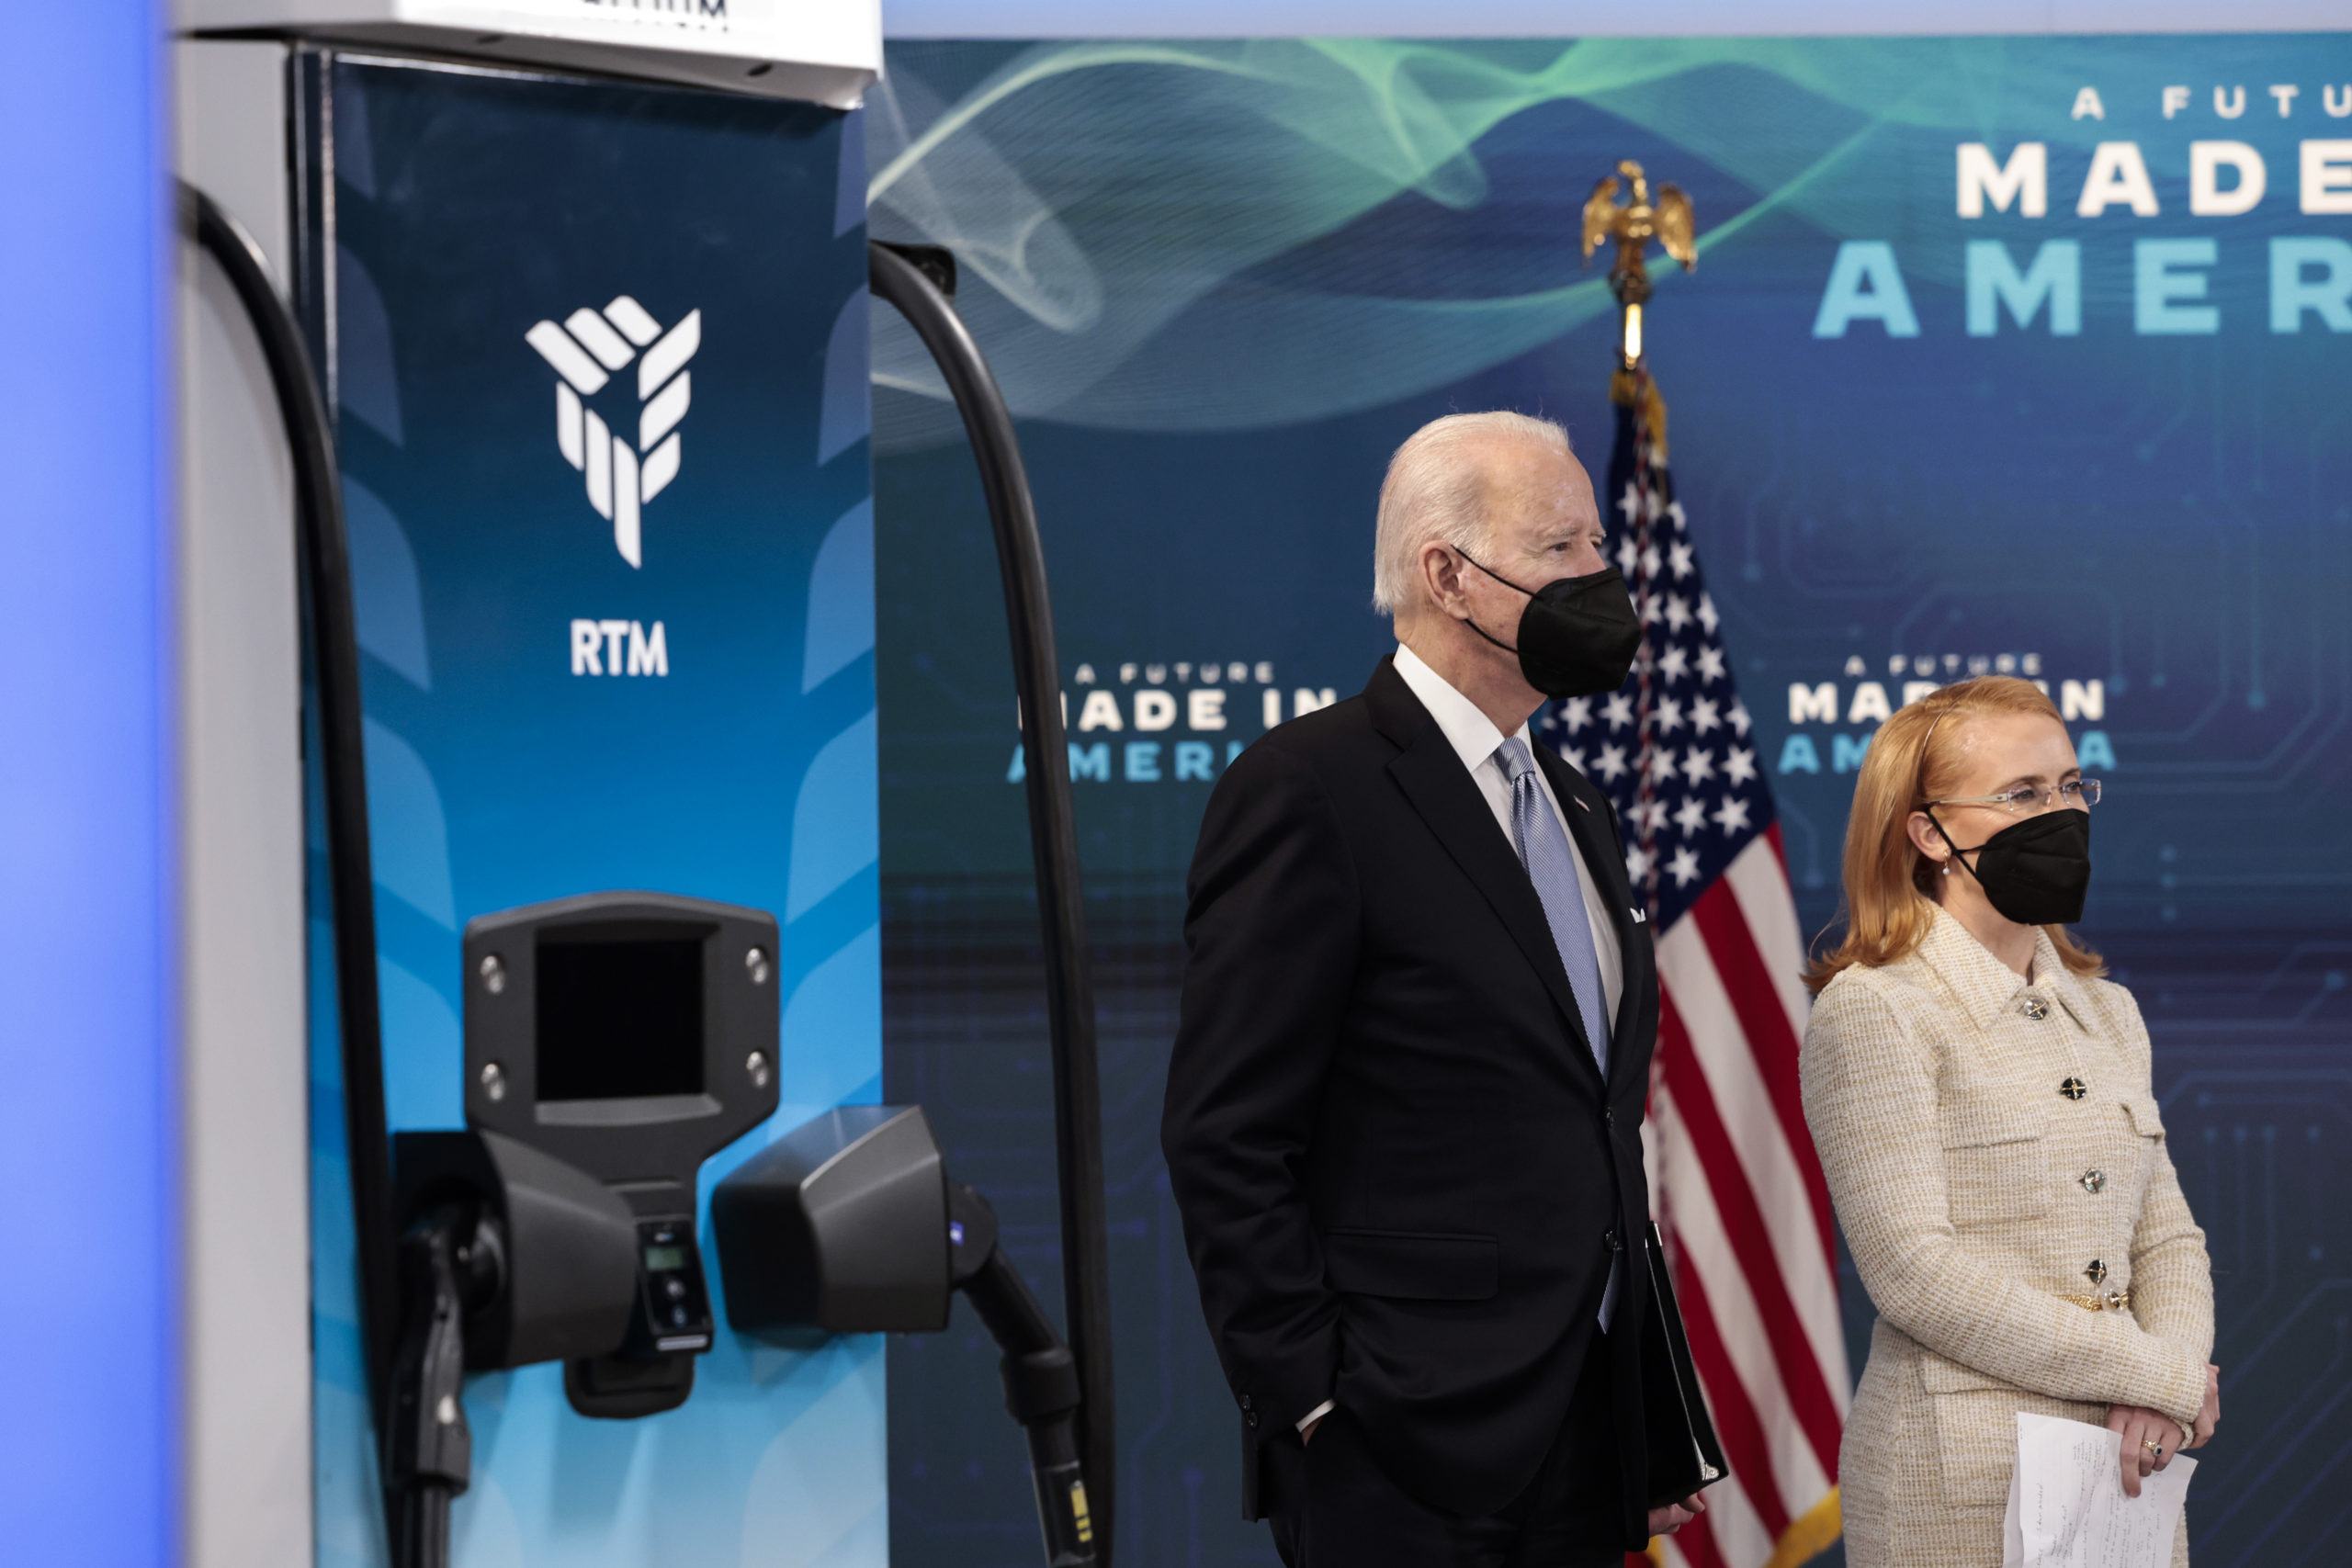 President Joe Biden and Tritium CEO Jane Hunter stand near an electric vehicle charger during an event at the White House on Tuesday. (Anna Moneymaker/Getty Images)